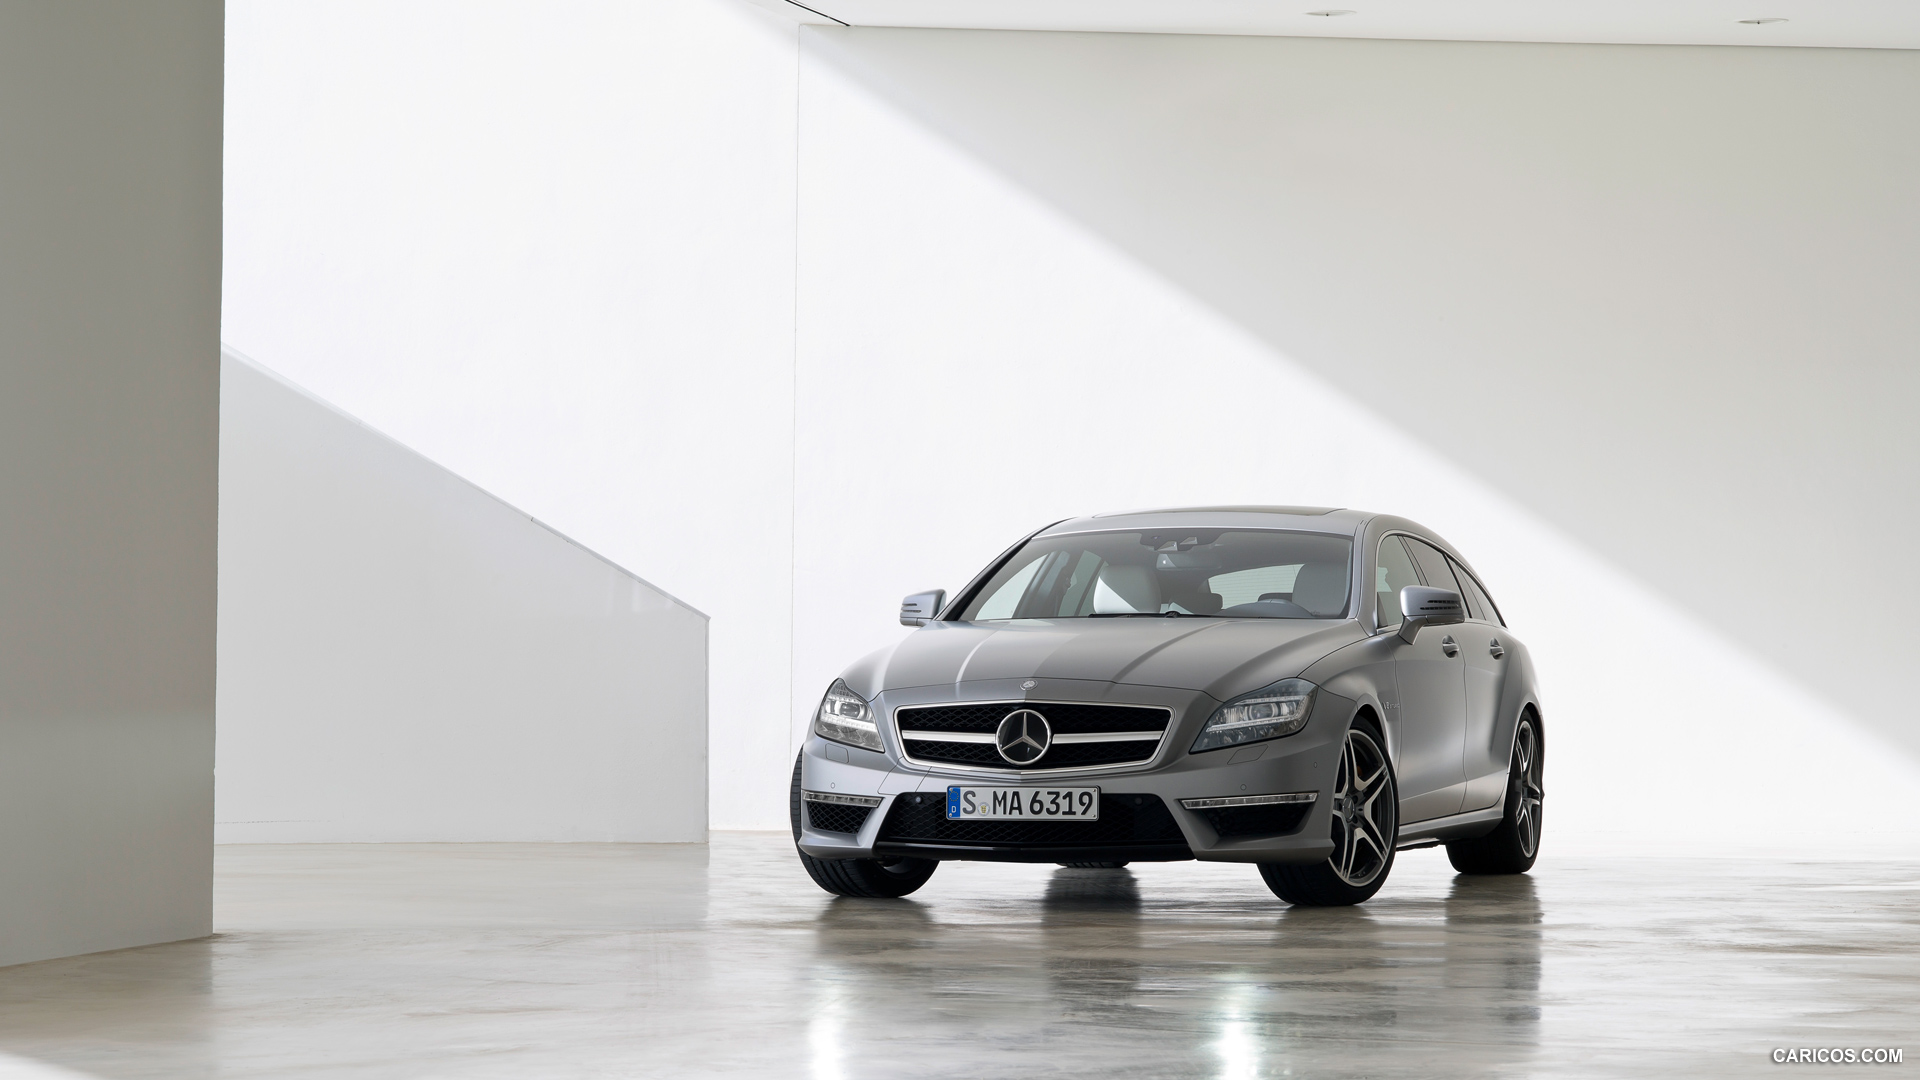 2013 Mercedes-Benz CLS 63 AMG Shooting Brake  - Front, #19 of 35